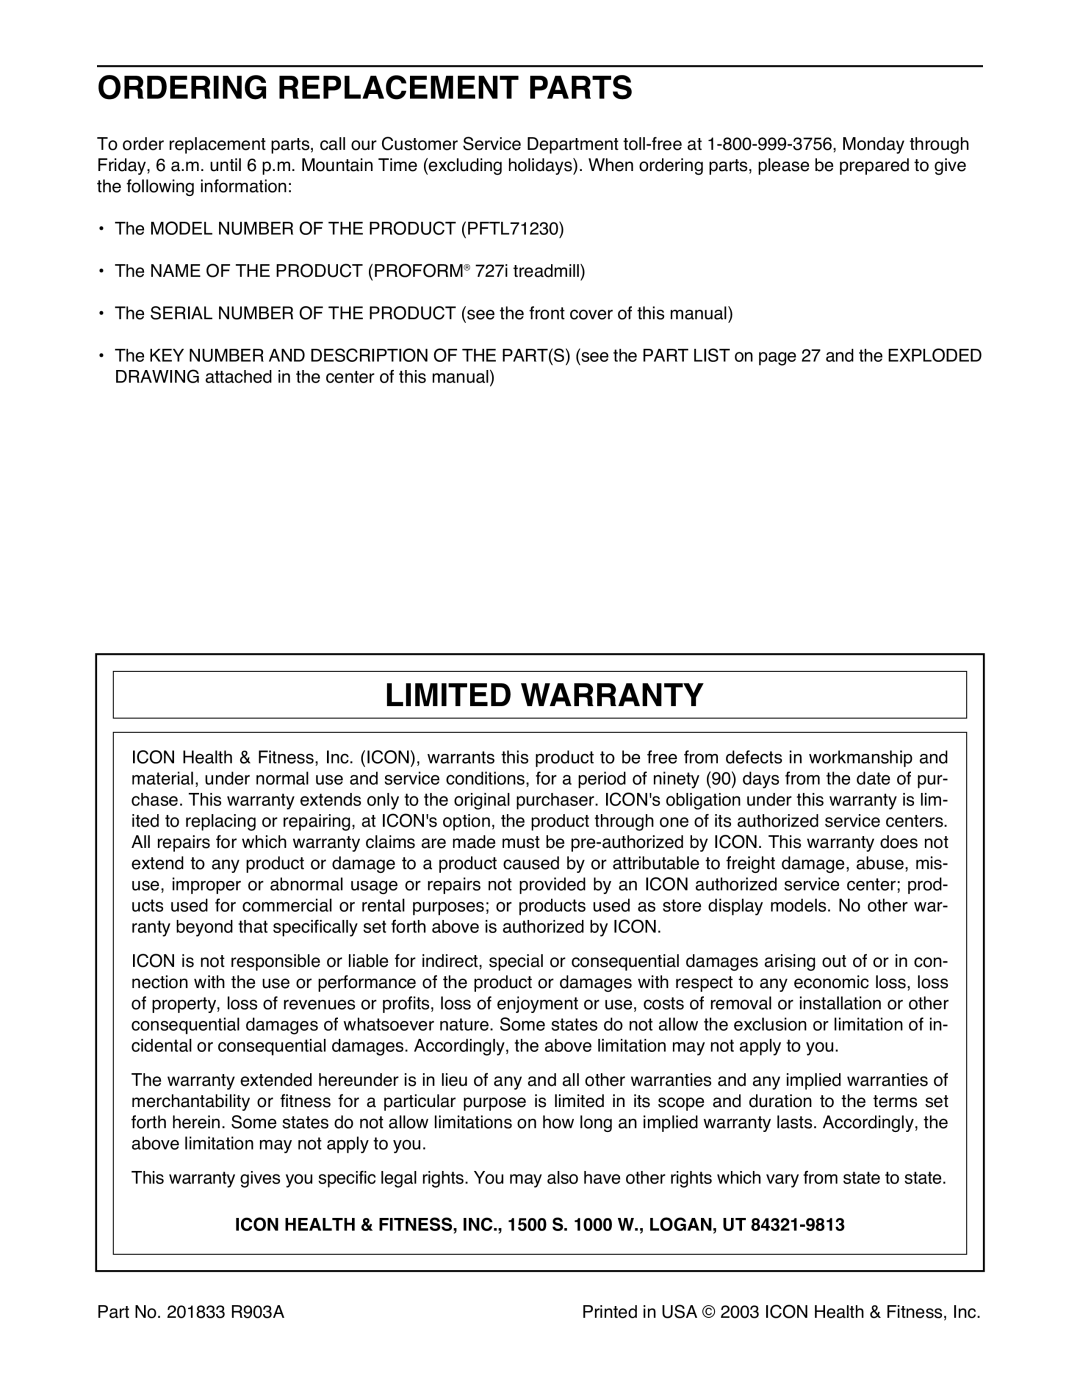 ProForm PFTL71230 Ordering Replacement Parts, Limited Warranty, Icon Health & FITNESS, INC., 1500 S W., LOGAN, UT 